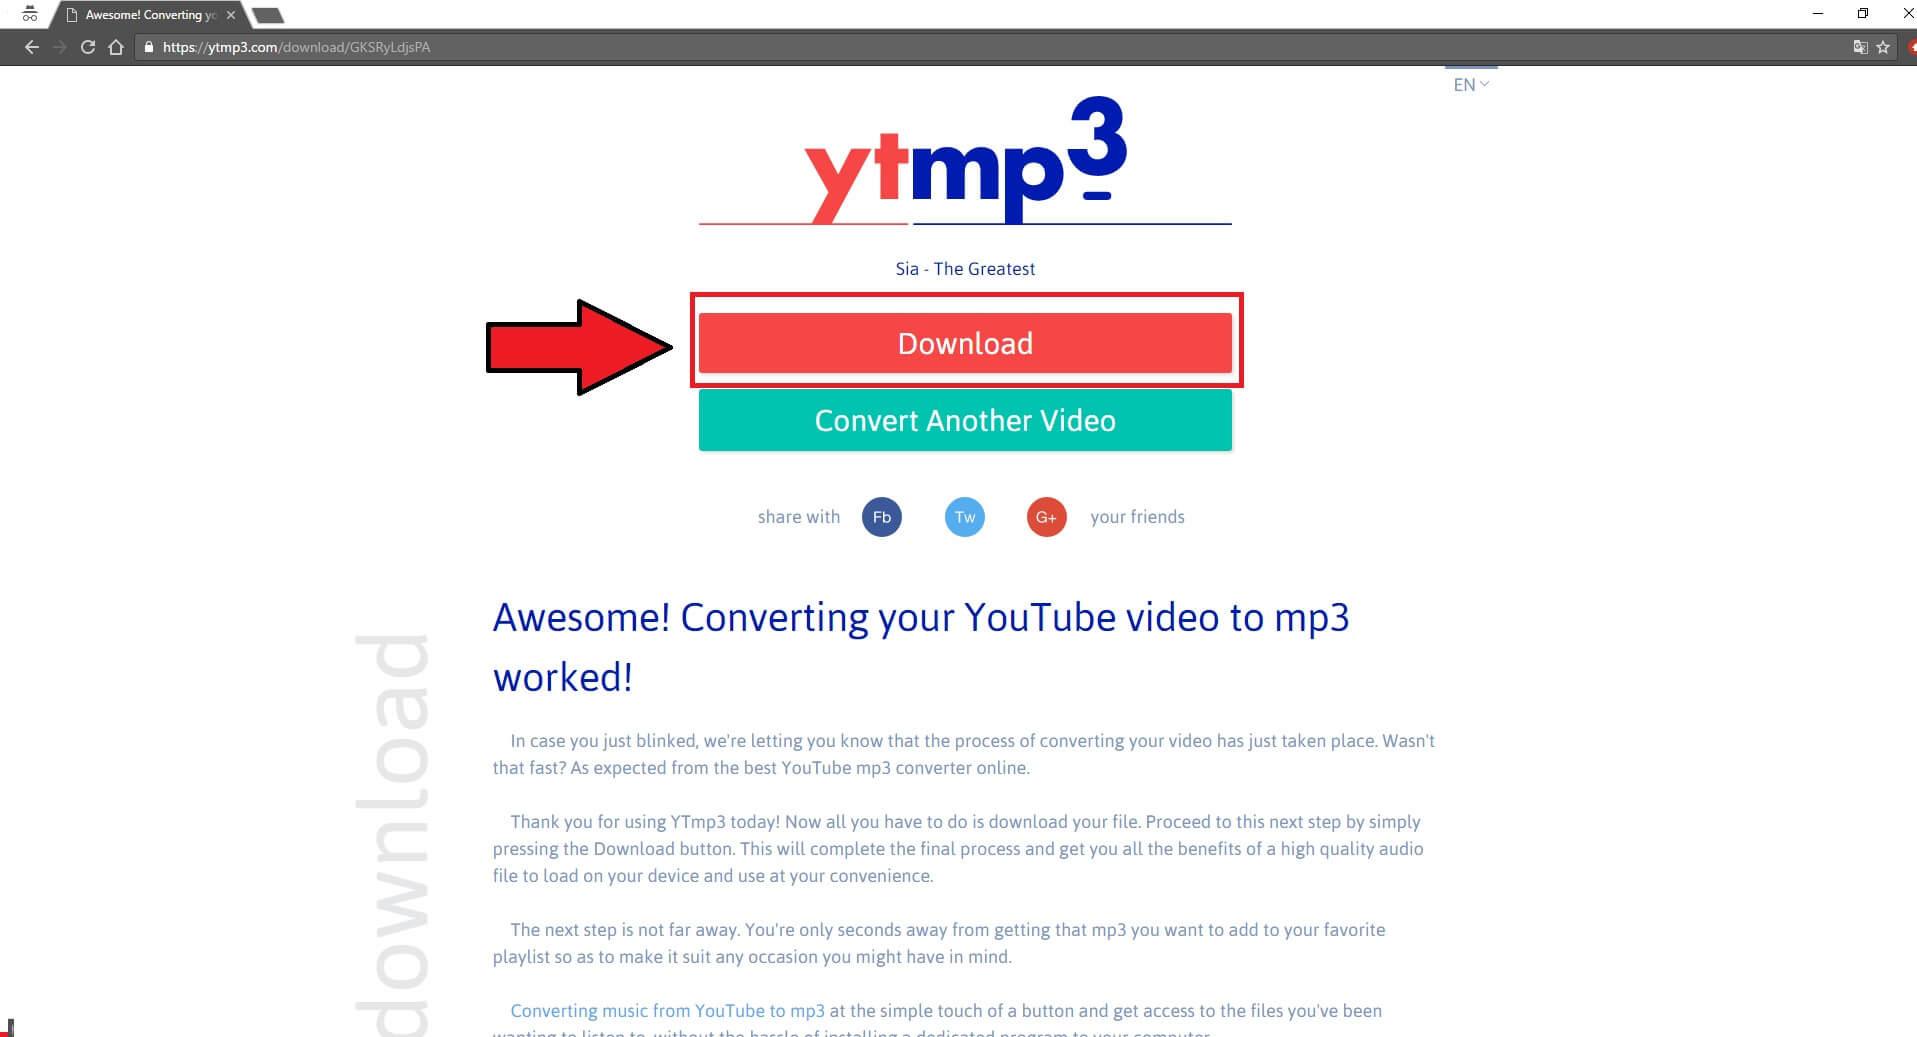 how to download youtube videos to mp3